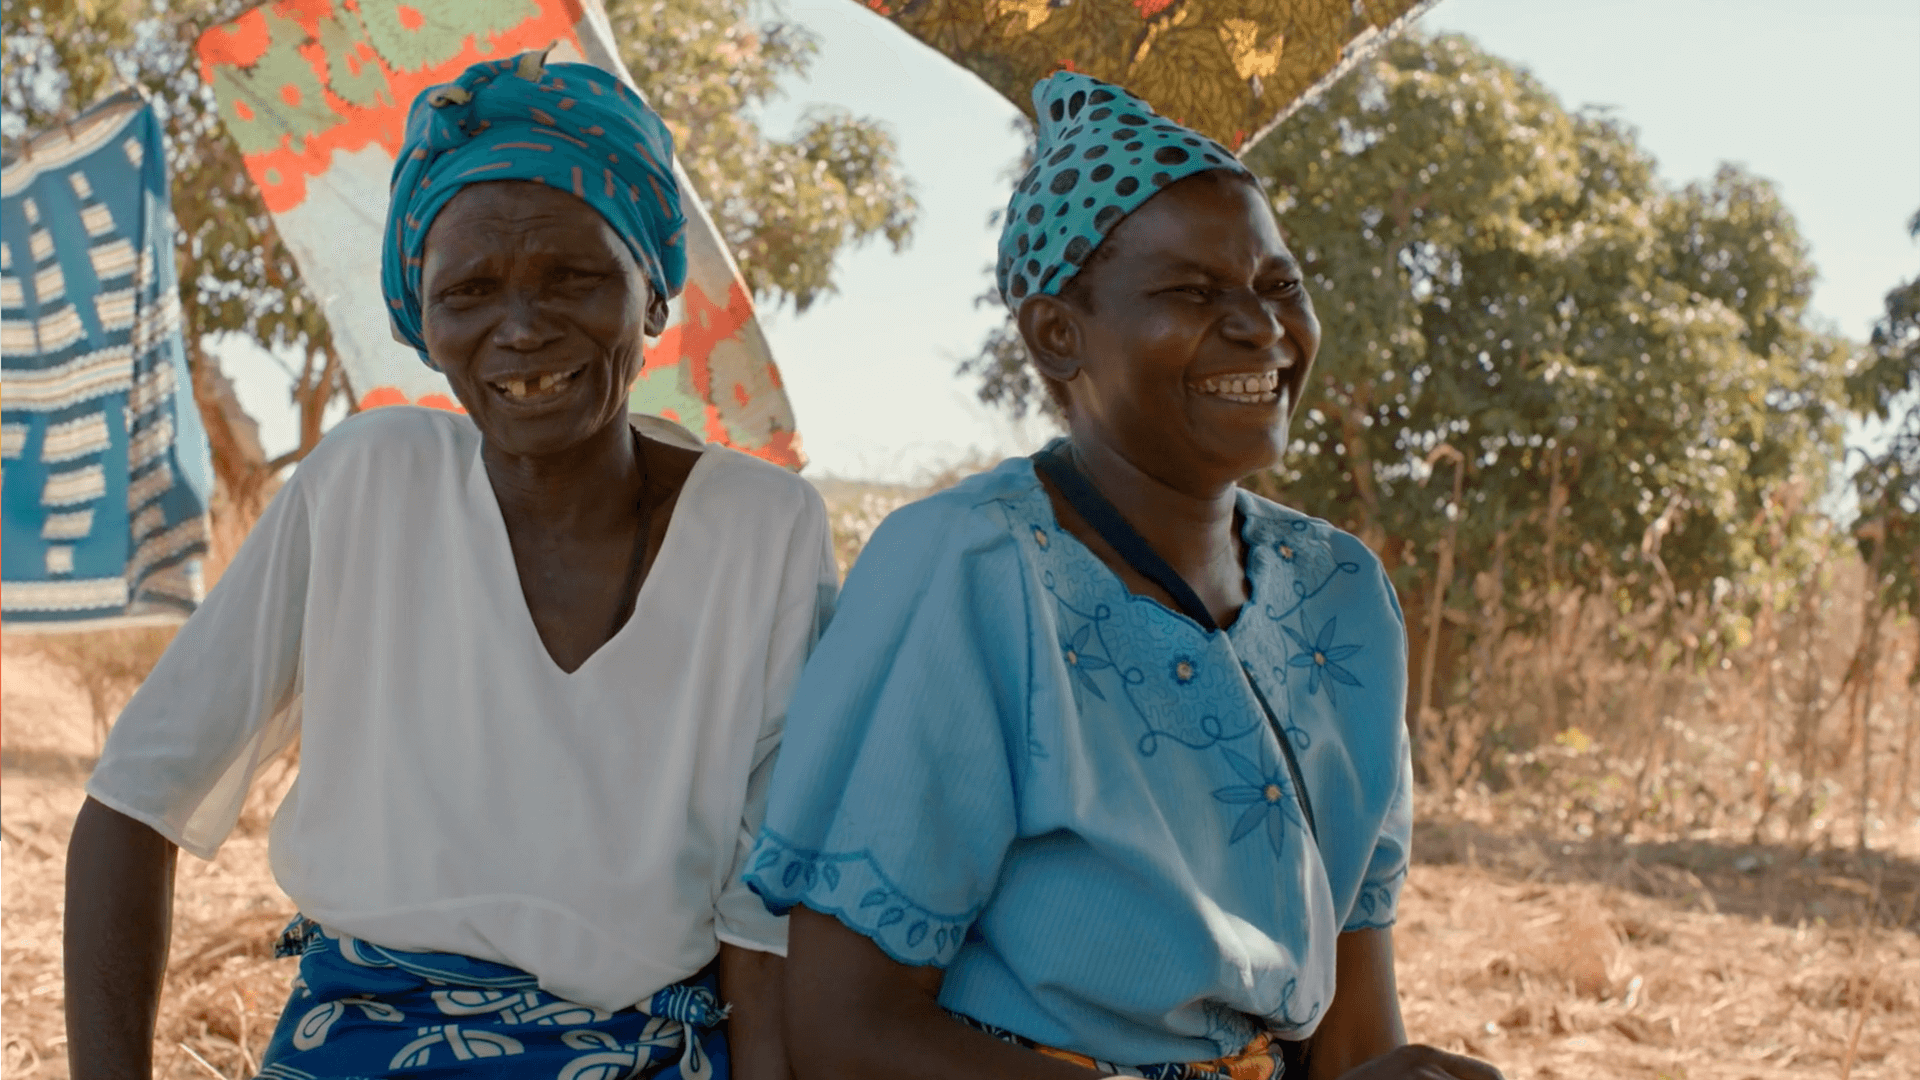 Still from the VANDAL produced World Vision featuring two women in head scarfs laughing